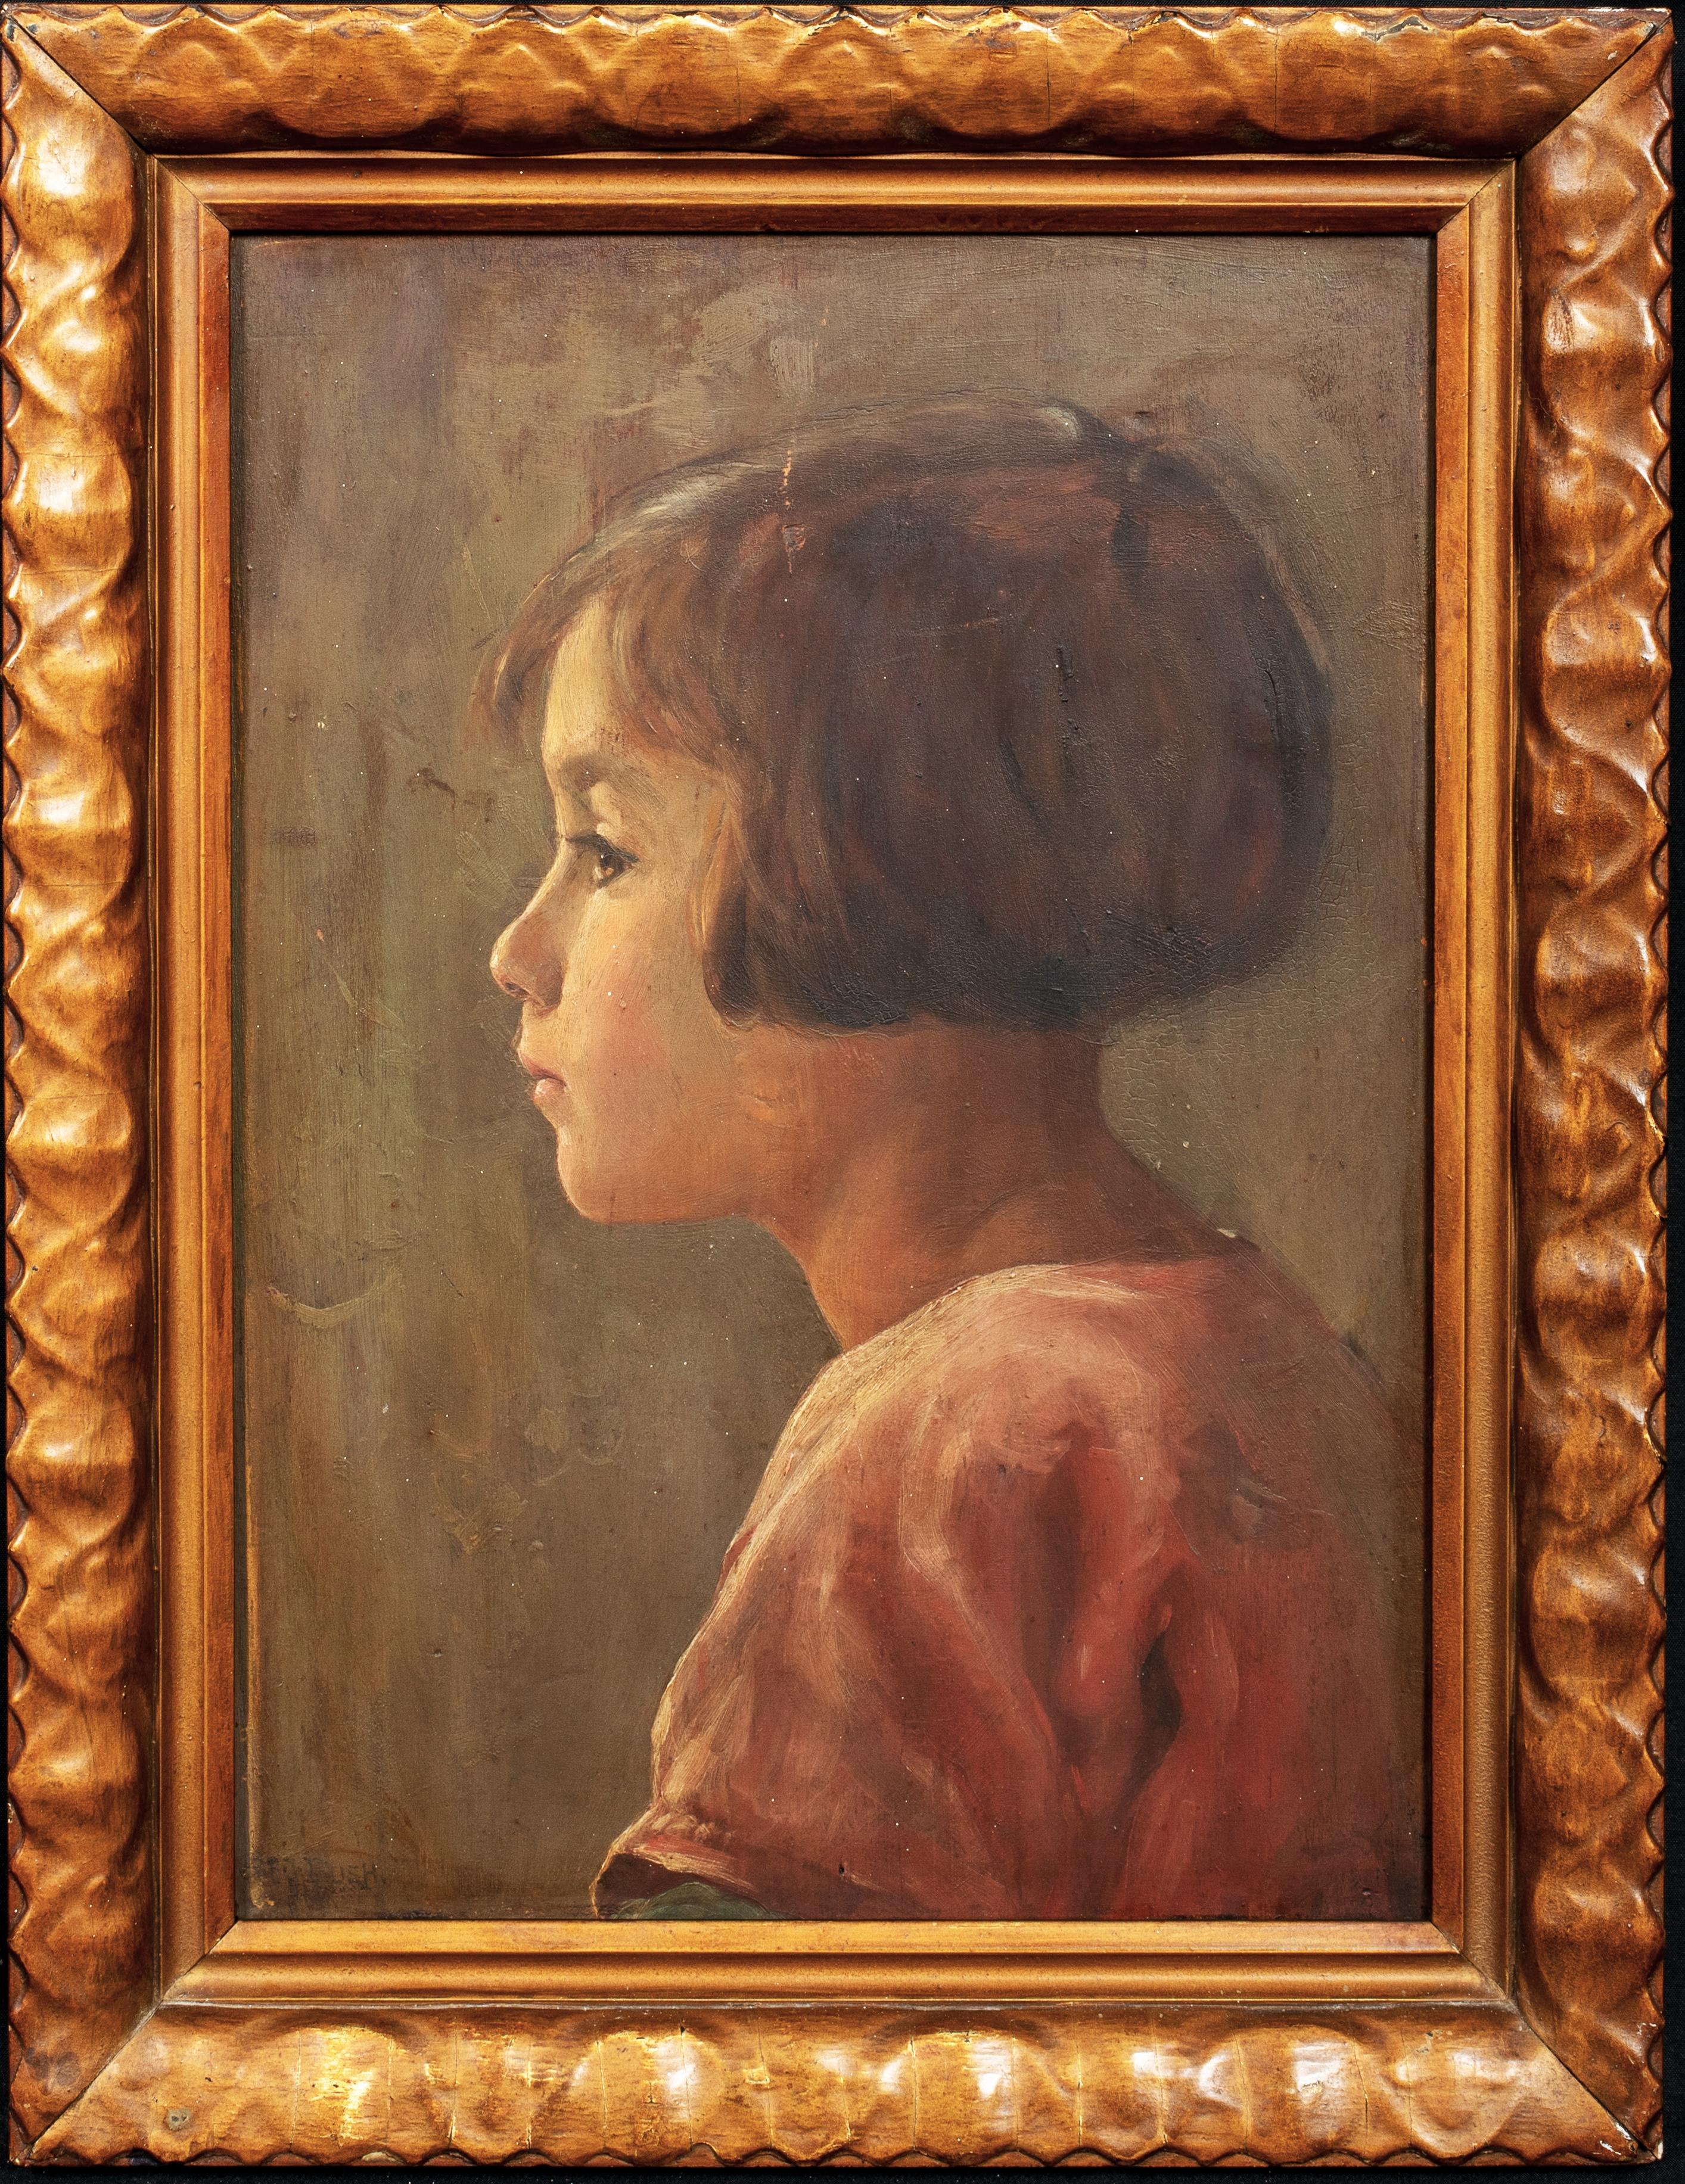 Portrait Of A Girl, dated 1931 - Exhibited At The Royal Academy  - Painting by Reginald Edgar James Bush 